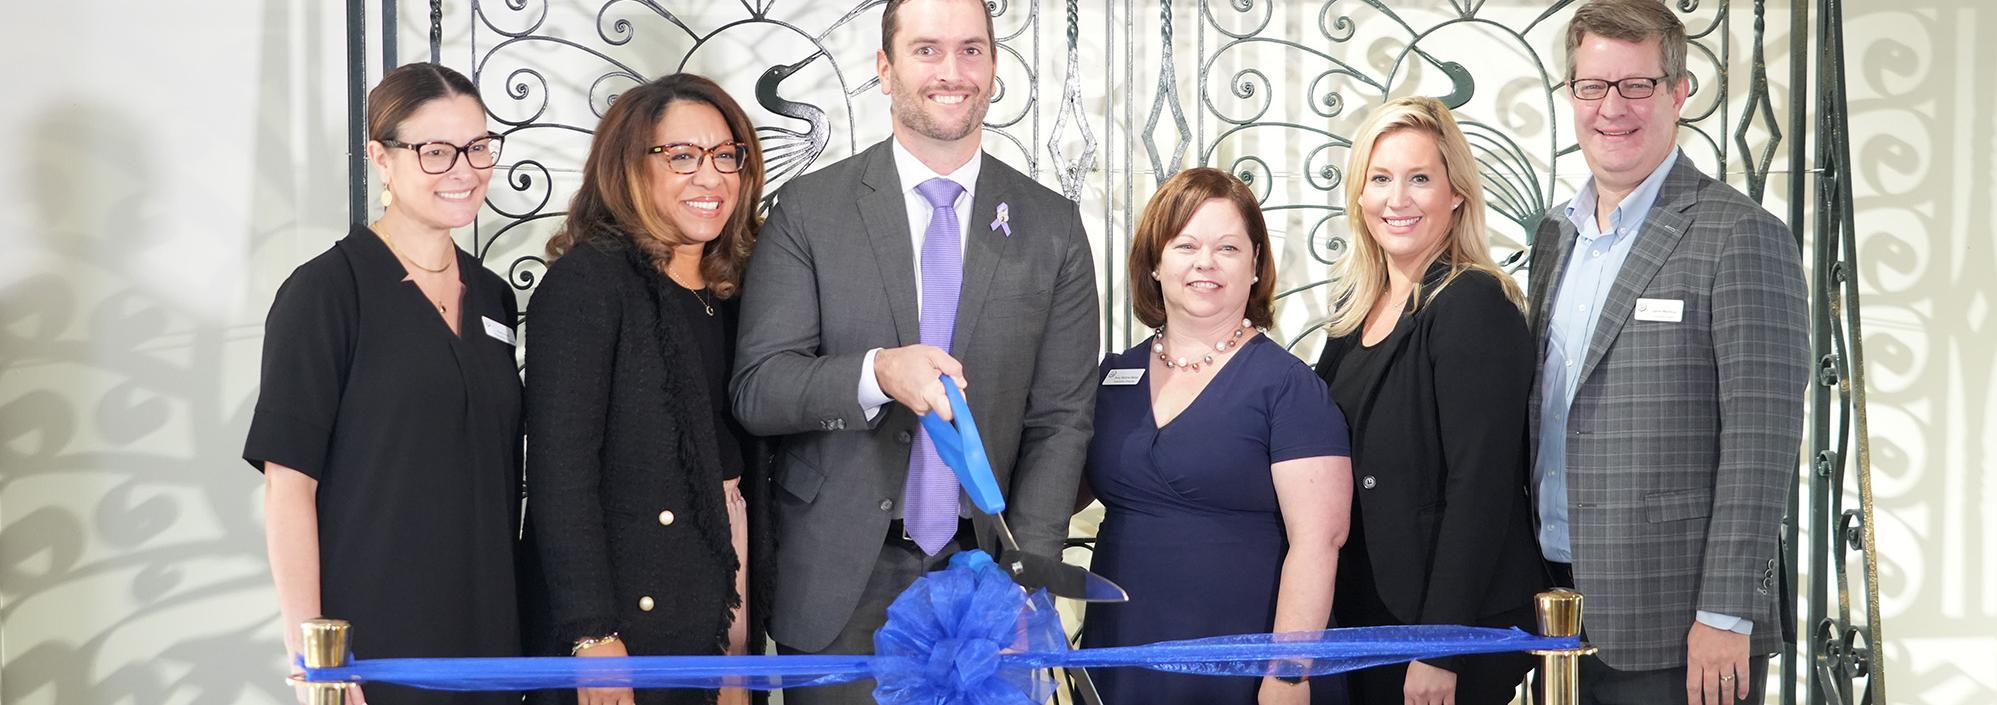 Group stands in front of a wrought iron gate on display with a blue ribbon in front of them. Man in center holds a giant pair of scissors as he prepares to cut the ribbon.